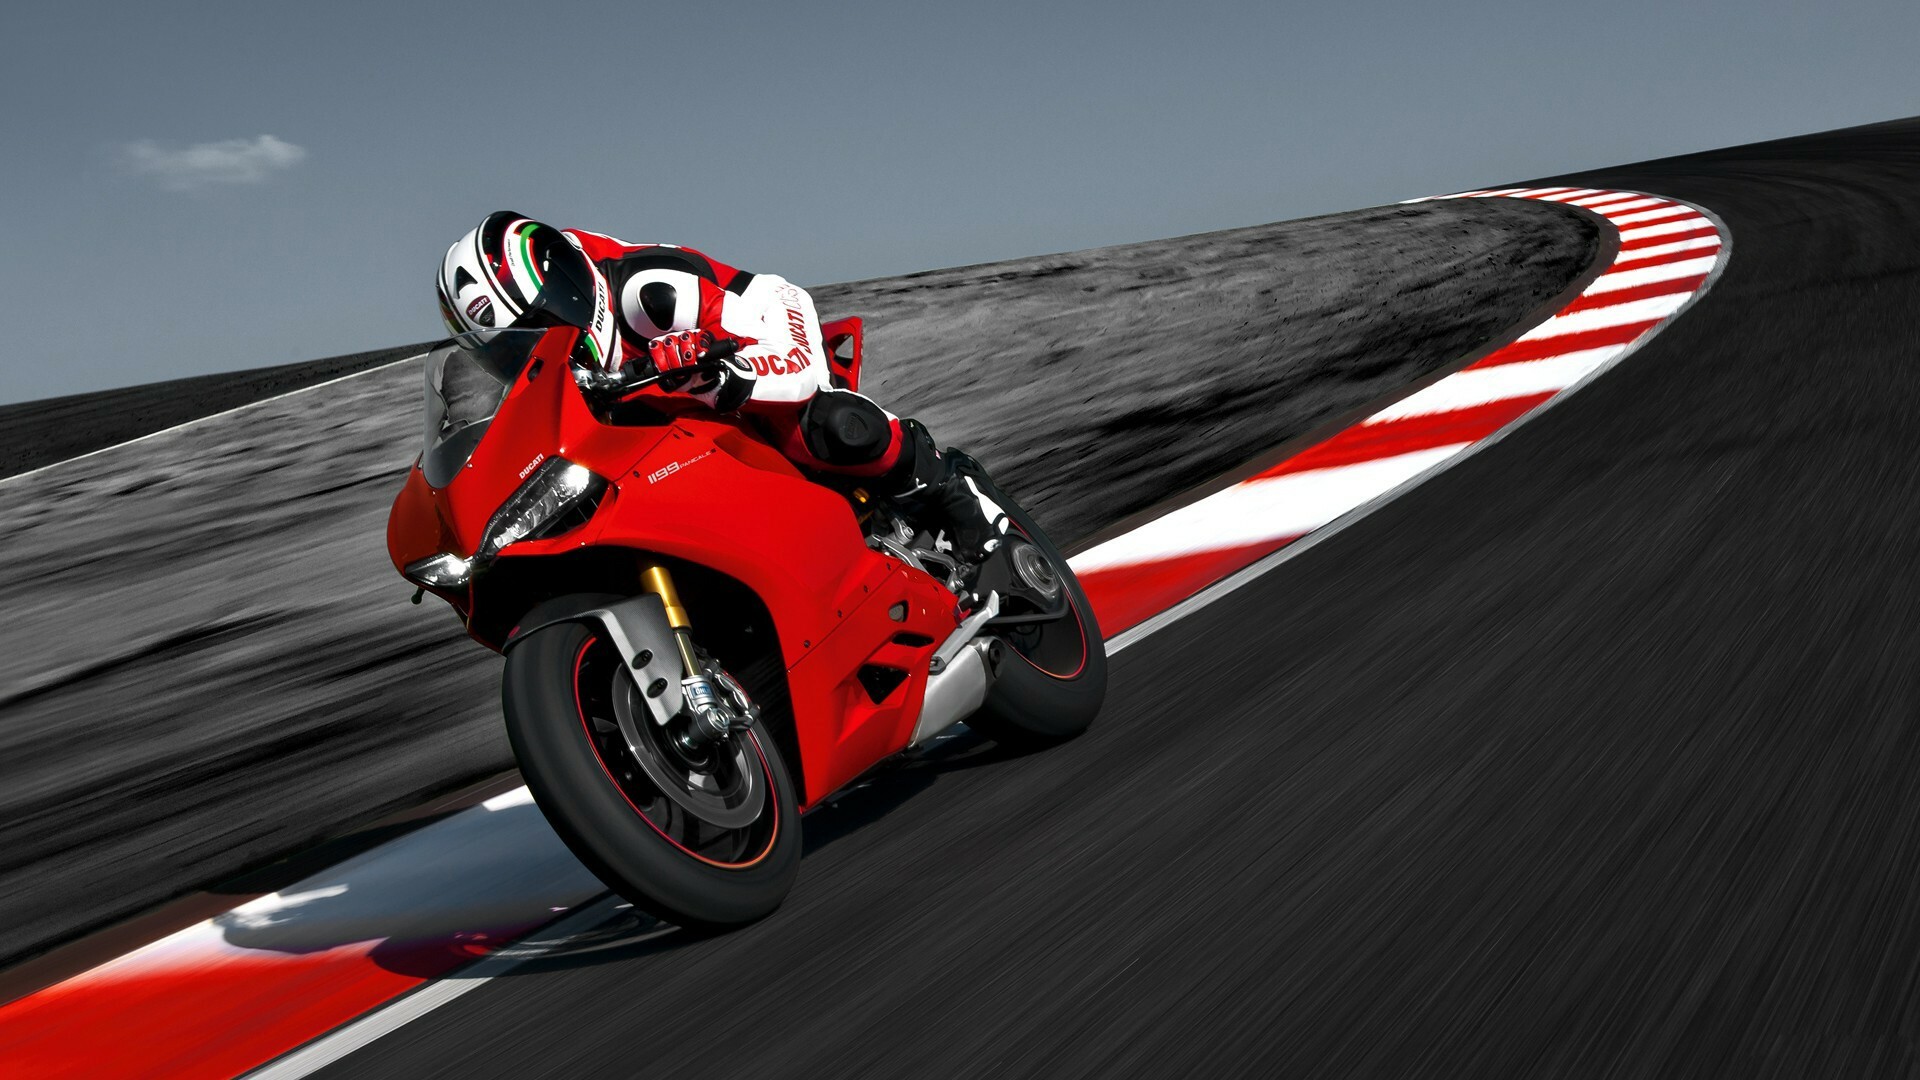 Ducati: The motorcycle-manufacturing division of Italian company. 1920x1080 Full HD Wallpaper.